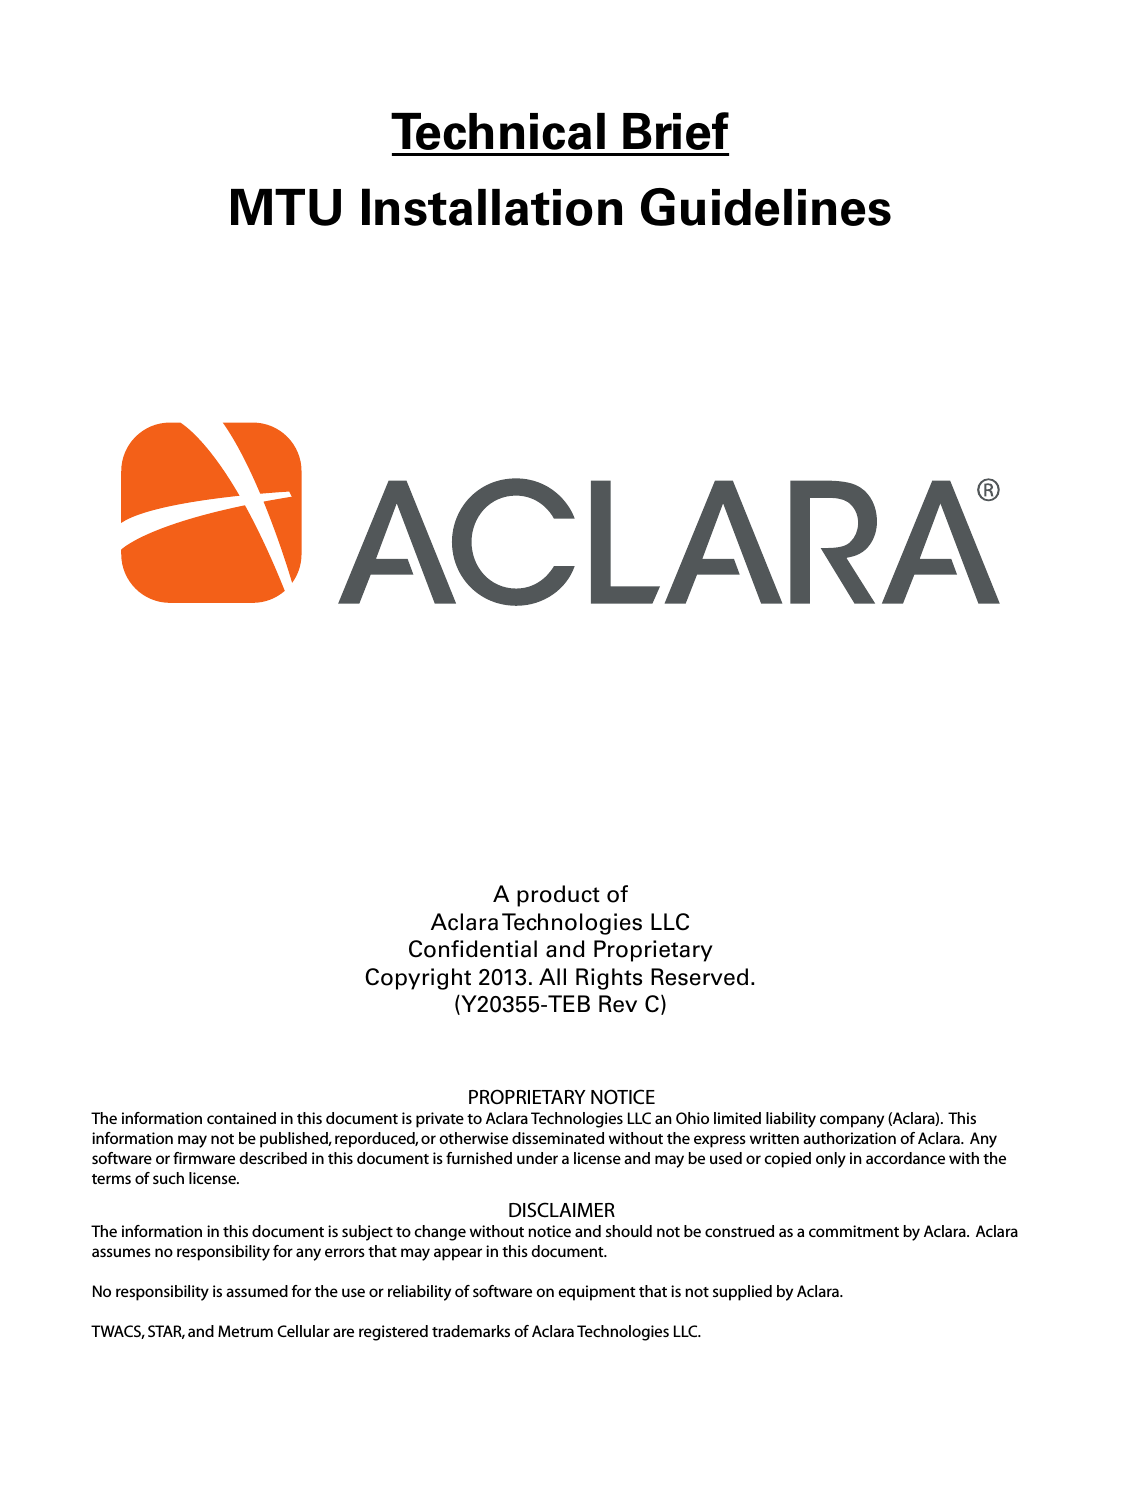 Technical BriefMTU Installation GuidelinesA product ofAclara Technologies  LLCConfidential and ProprietaryCopyright 2013. All Rights Reserved.(Y20355-TEB Rev C)PROPRIETARY NOTICEThe information contained in this document is private to Aclara Technologies LLC an Ohio limited liability company (Aclara).  This information may not be published, reporduced, or otherwise disseminated without the express written authorization of Aclara.  Anysoftware or firmware described in this document is furnished under a license and may be used or copied only in accordance with theterms of such license.DISCLAIMERThe information in this document is subject to change without notice and should not be construed as a commitment by Aclara.  Aclara assumes no responsibility for any errors that may appear in this document. No responsibility is assumed for the use or reliability of software on equipment that is not supplied by Aclara.TWACS, STAR, and Metrum Cellular are registered trademarks of Aclara Technologies LLC.